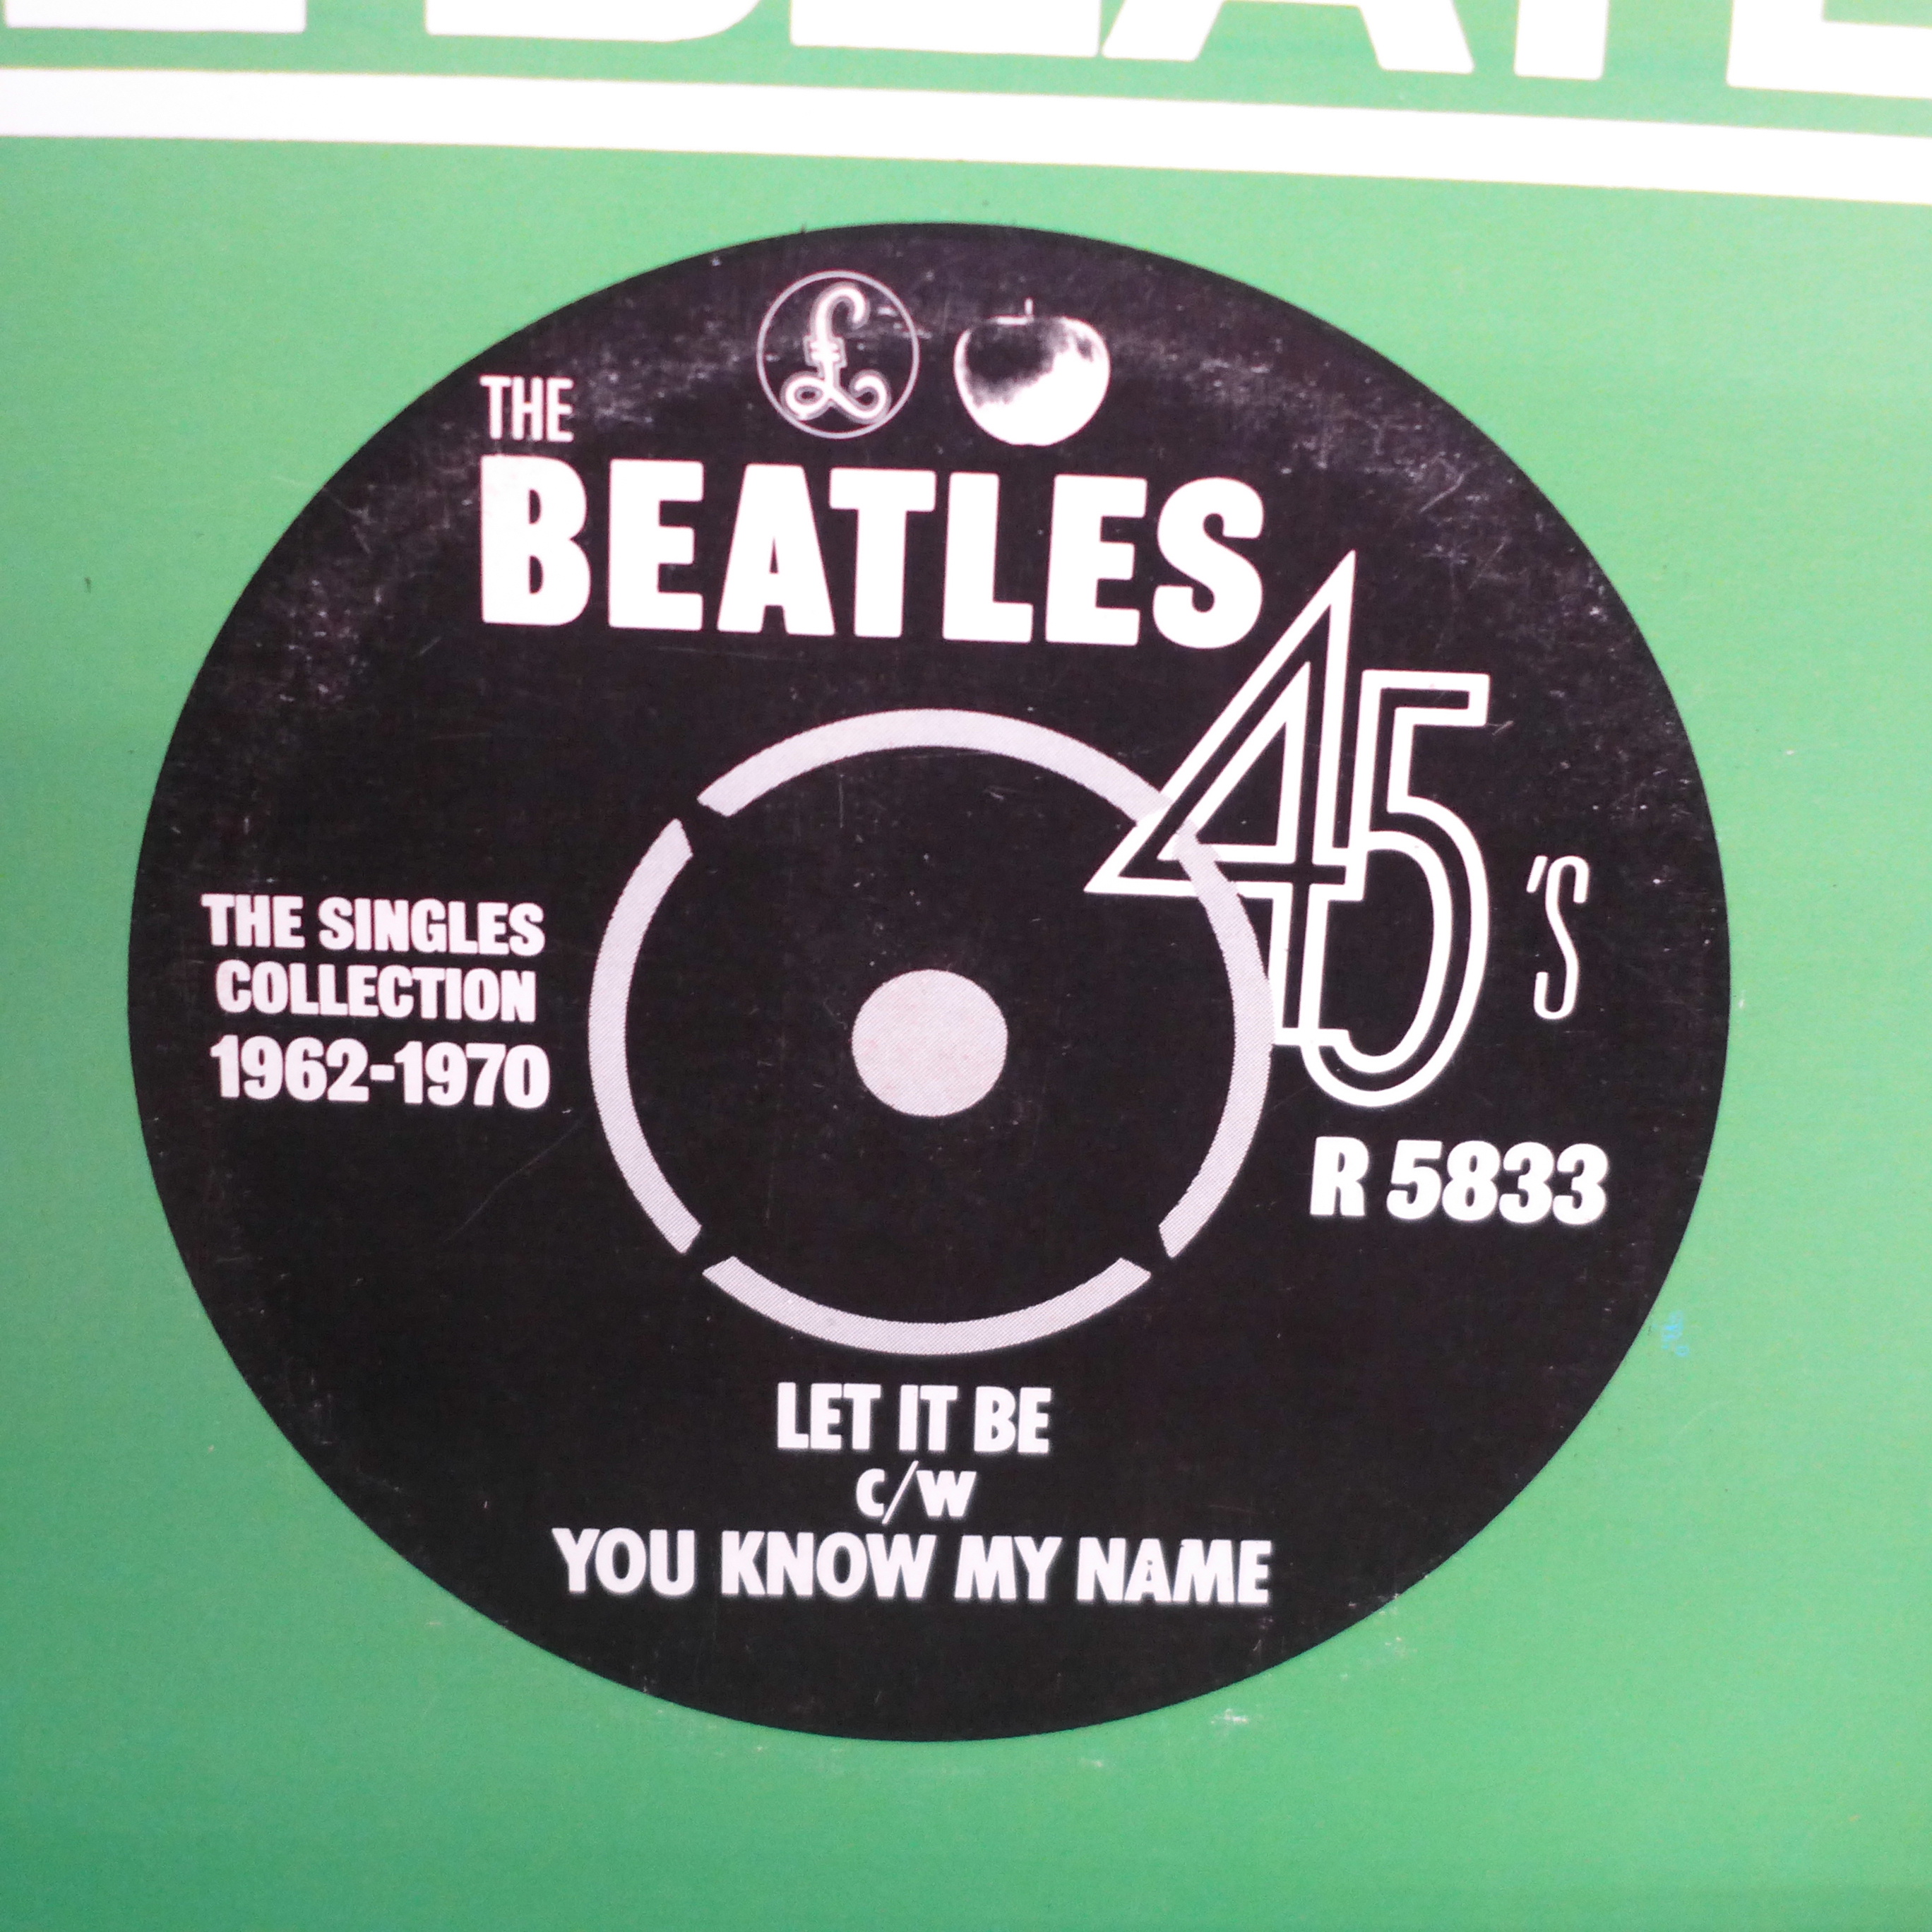 The Beatles Collection, set of 7" 45rpm singles, (24) - Image 2 of 3